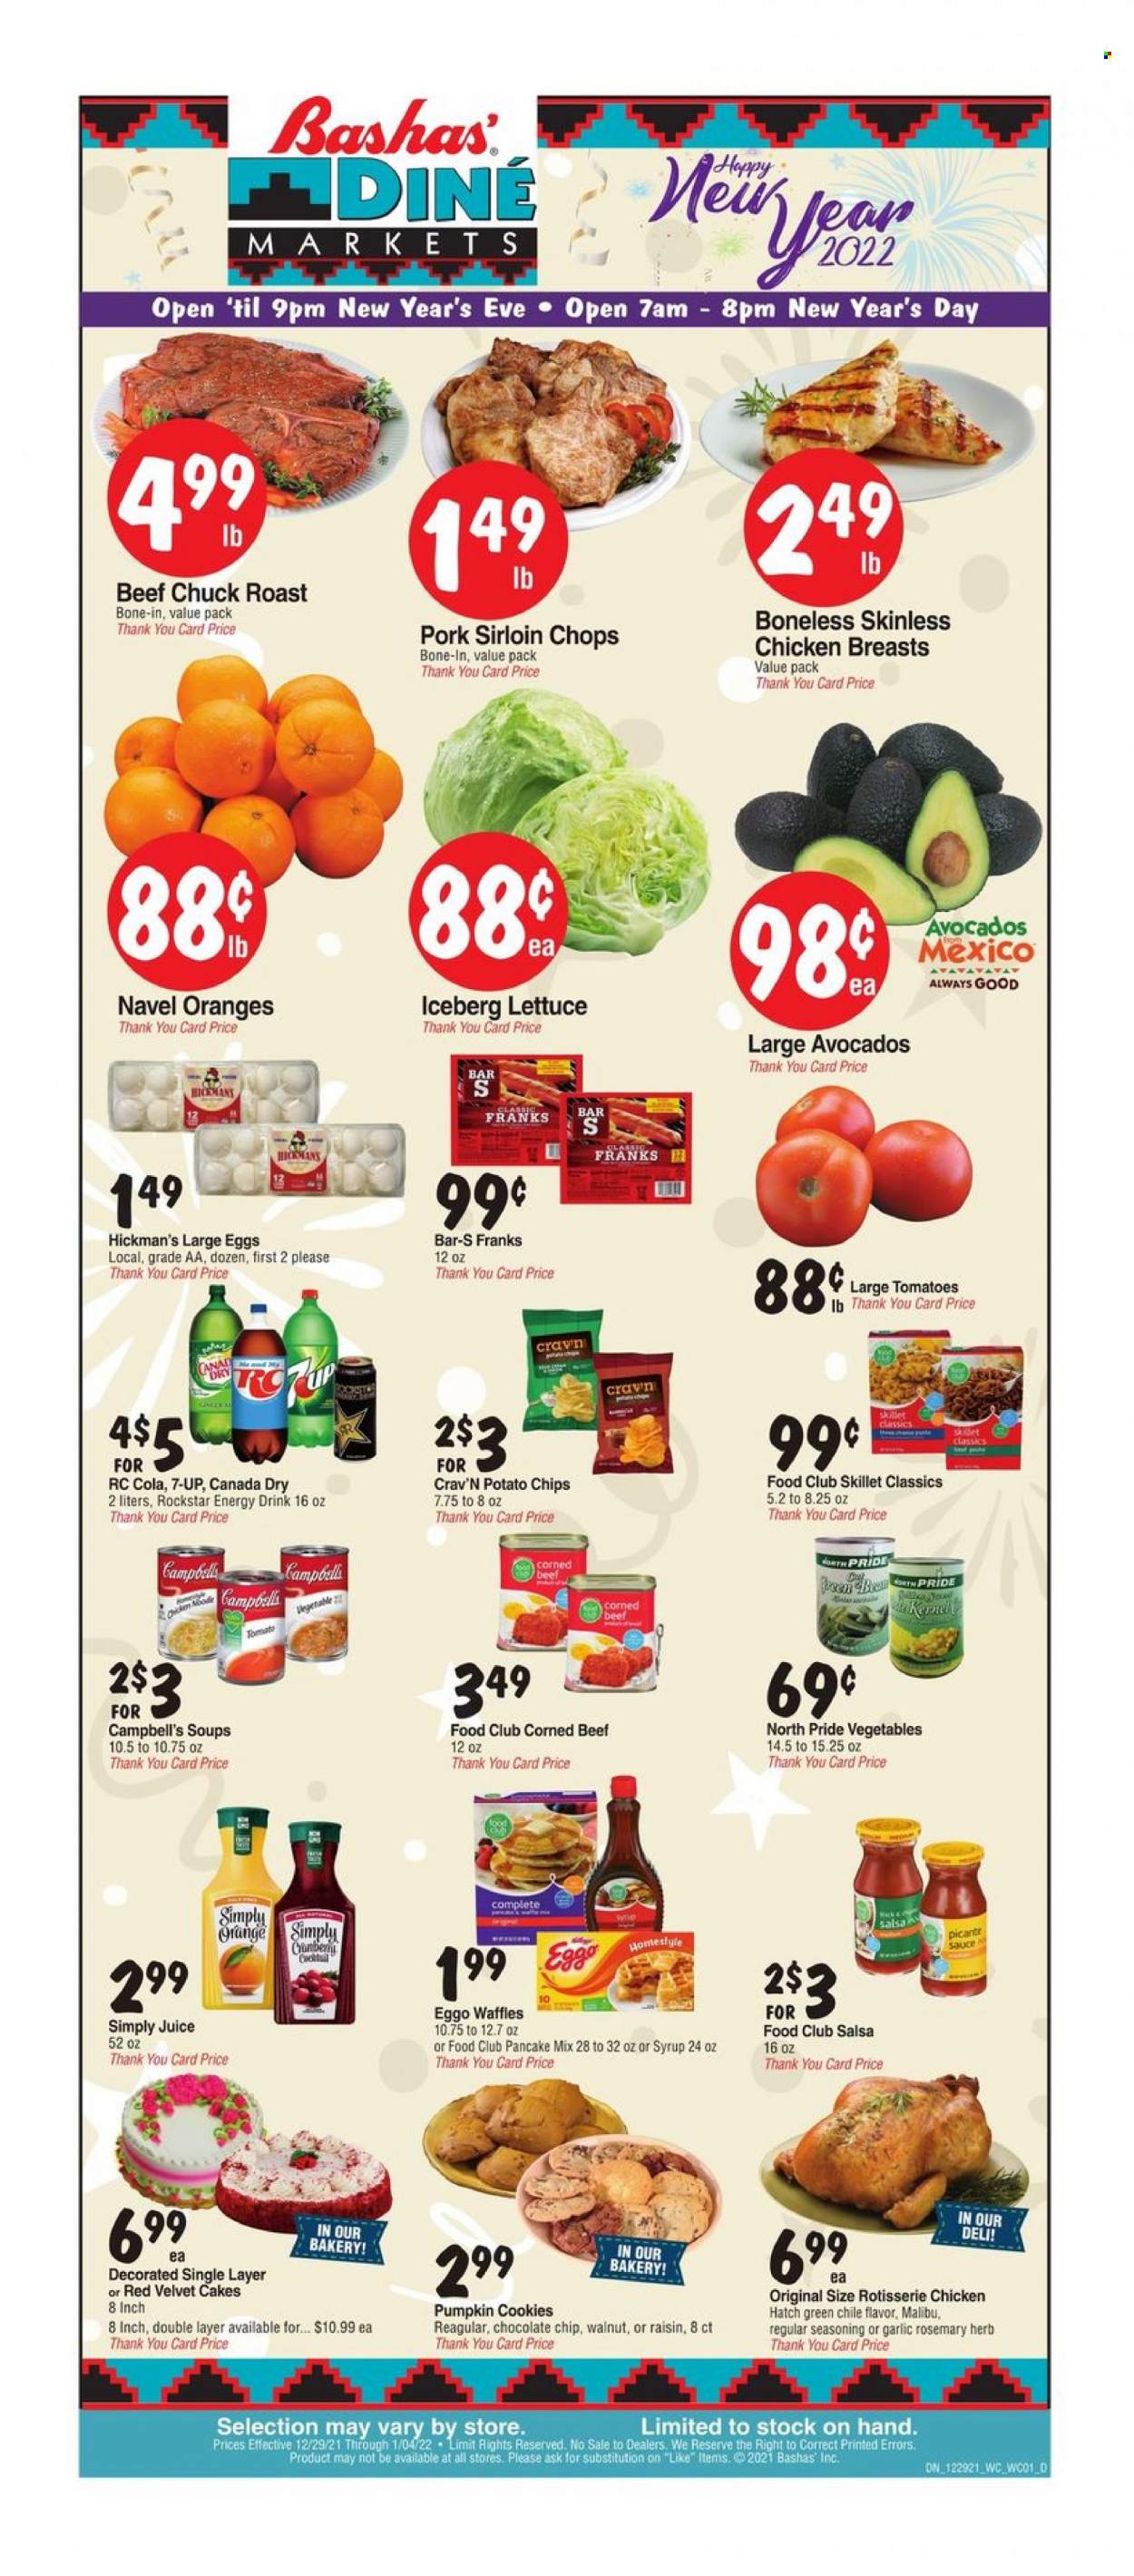 thumbnail - Bashas' Diné Markets Flyer - 12/29/2021 - 01/04/2022 - Sales products - cake, waffles, garlic, tomatoes, lettuce, avocado, Campbell's, chicken roast, sauce, pancakes, corned beef, large eggs, cookies, potato chips, chips, rosemary, spice, salsa, Canada Dry, juice, energy drink, 7UP, Rockstar, Malibu, chicken breasts, beef meat, chuck roast, pork loin, navel oranges. Page 1.